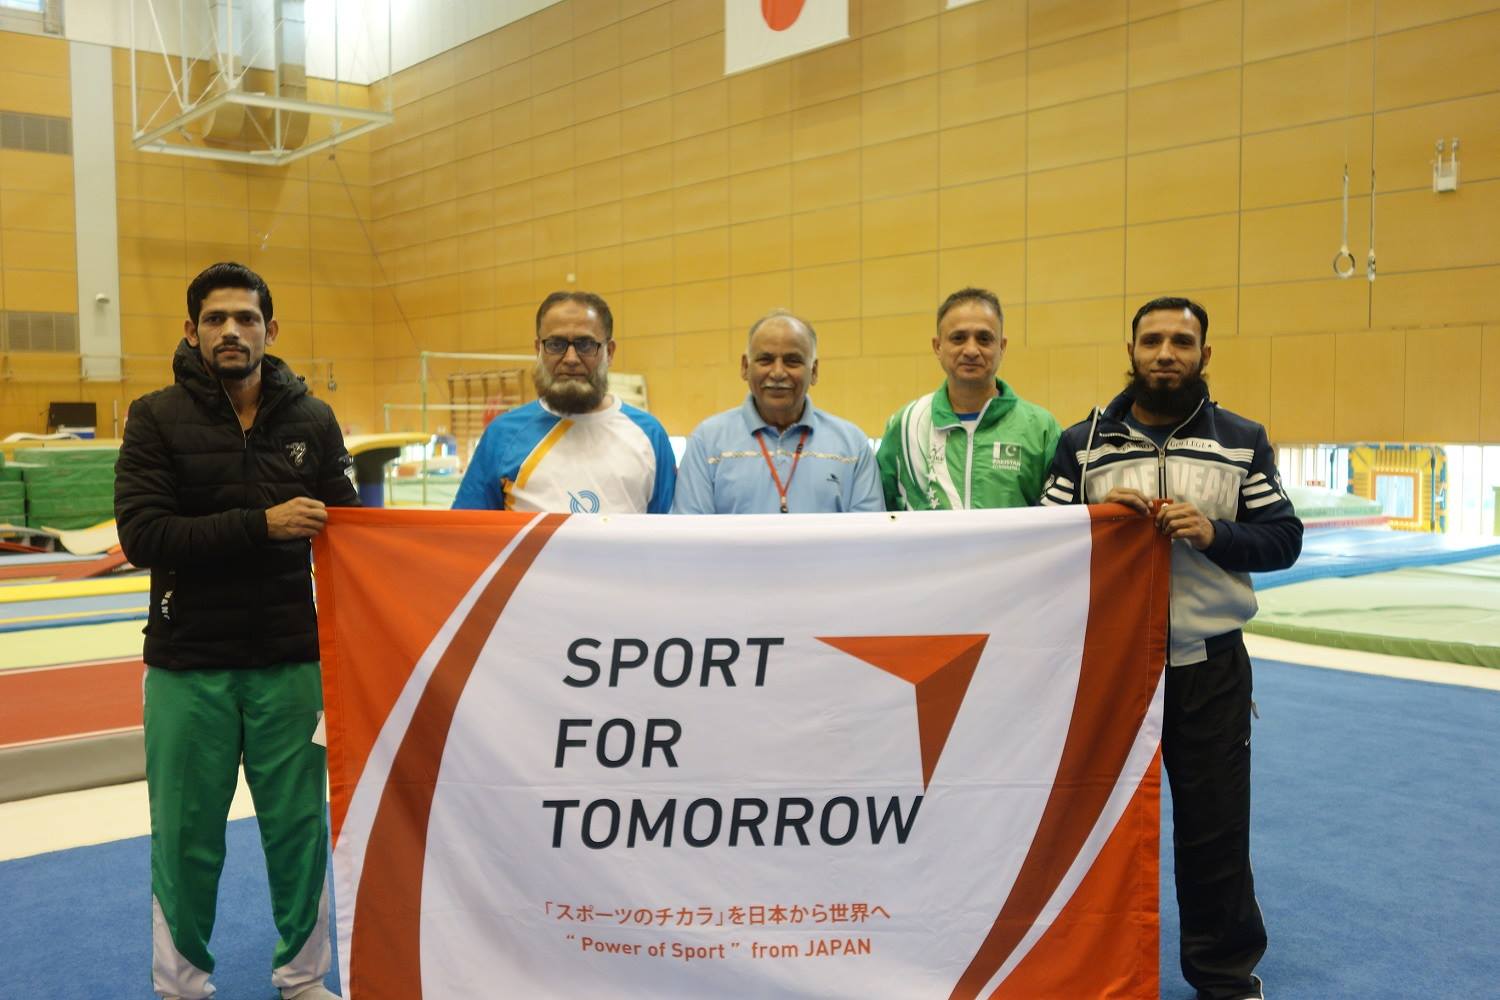 Japan Sports Agency Commissioned Project: JSC/JOC/NF Use Nishigaoka High Performance Center and Other Facilities for Collaboration Project (Gymnastics, Pakistan)1